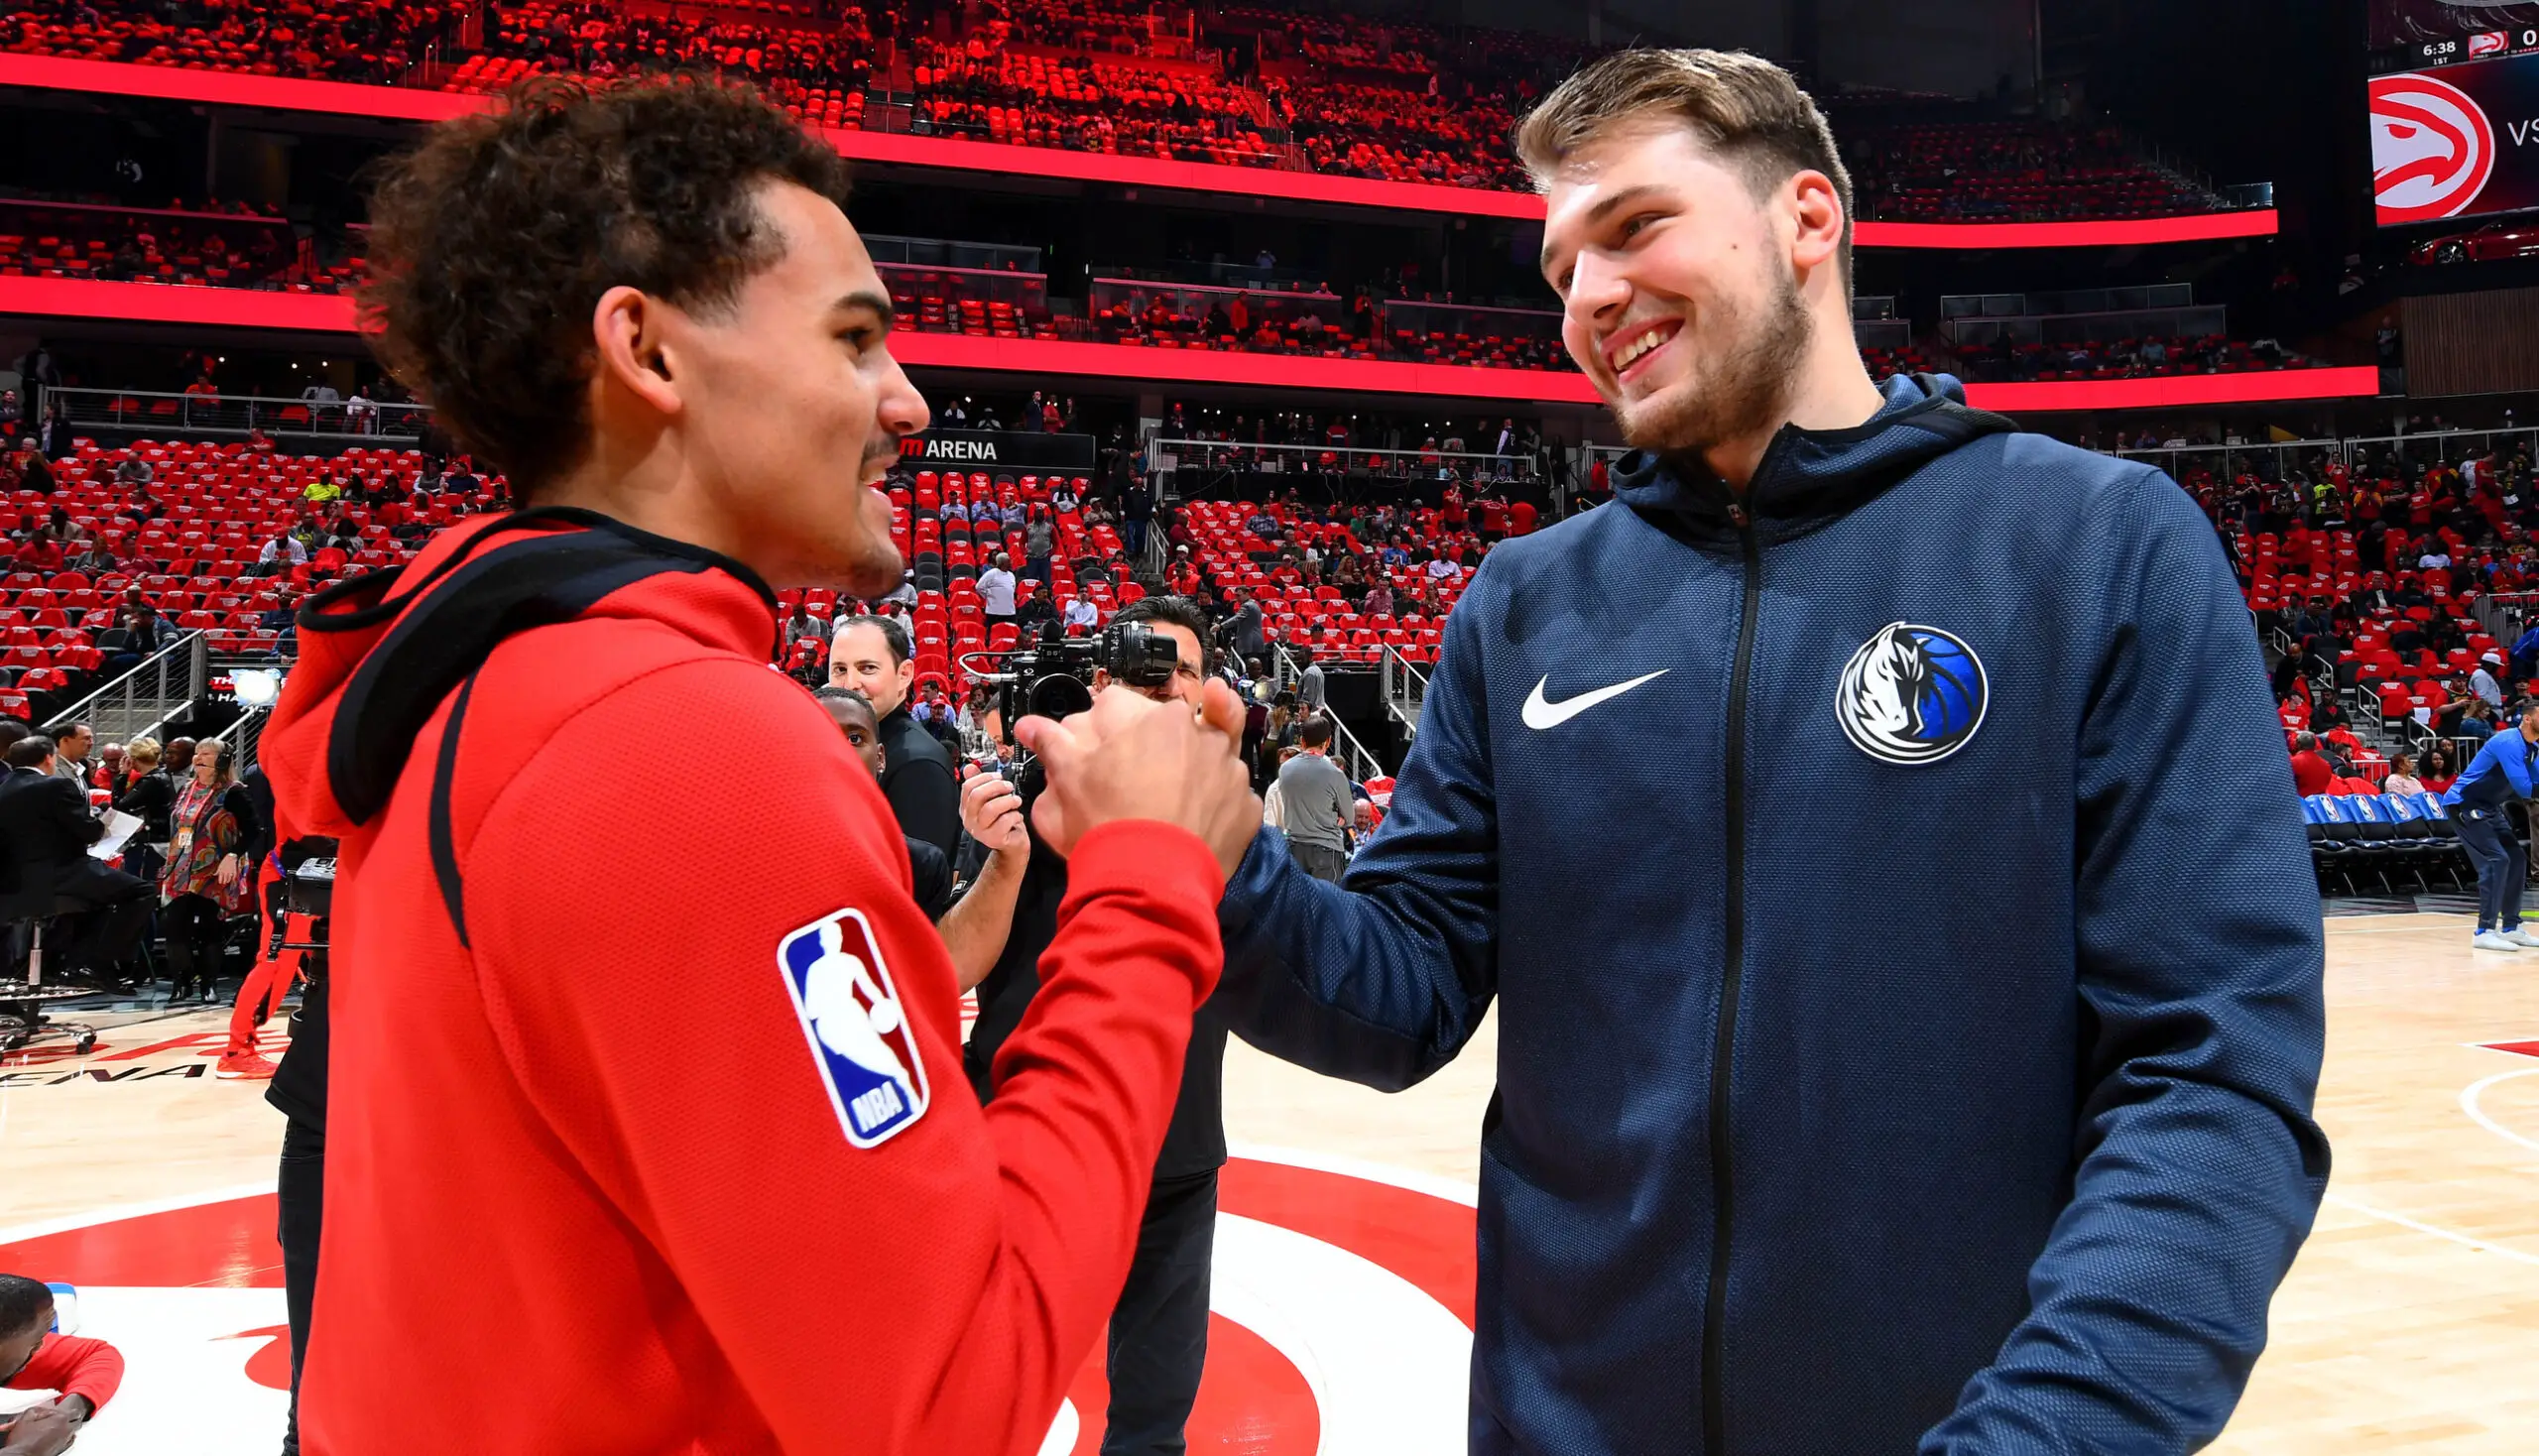 Trae Young and Luka Dončić (photo credit: Bleacher Report)